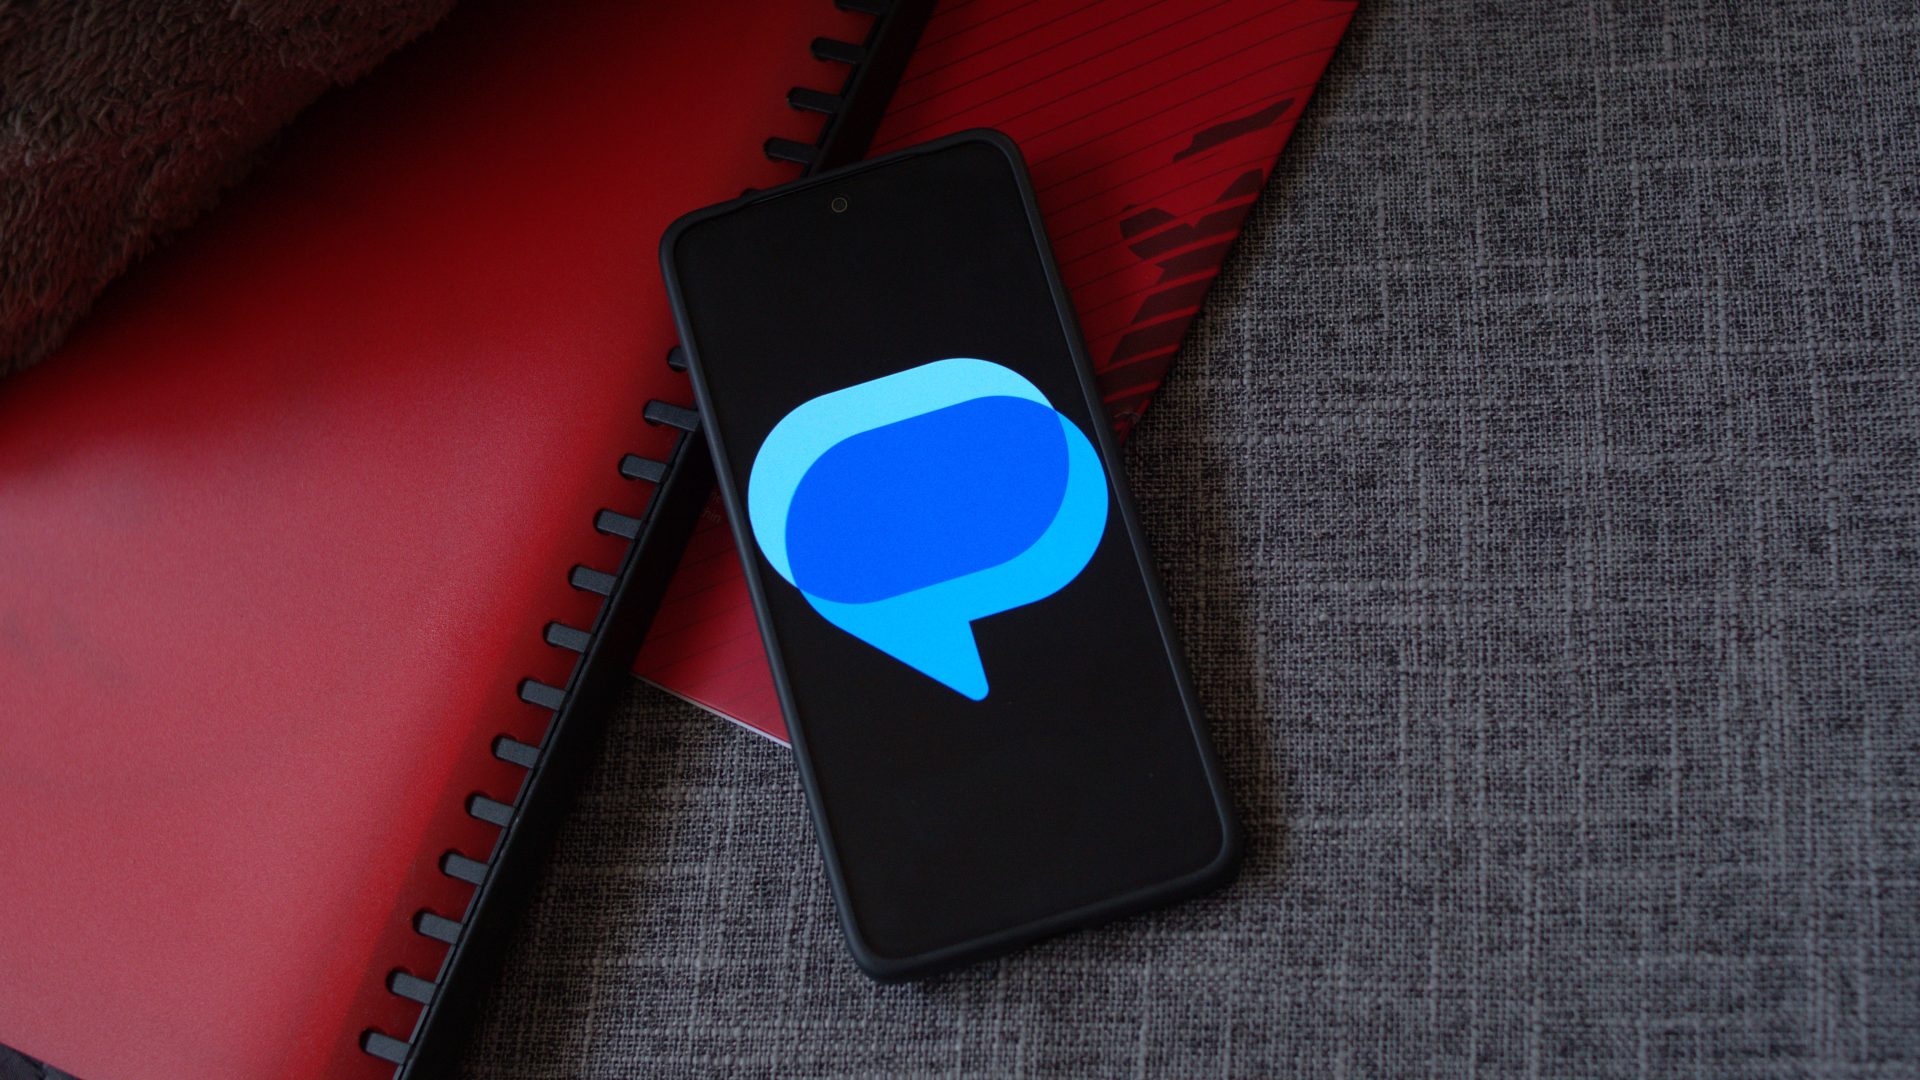 Google Messages hides your composed texts when you leave a conversation